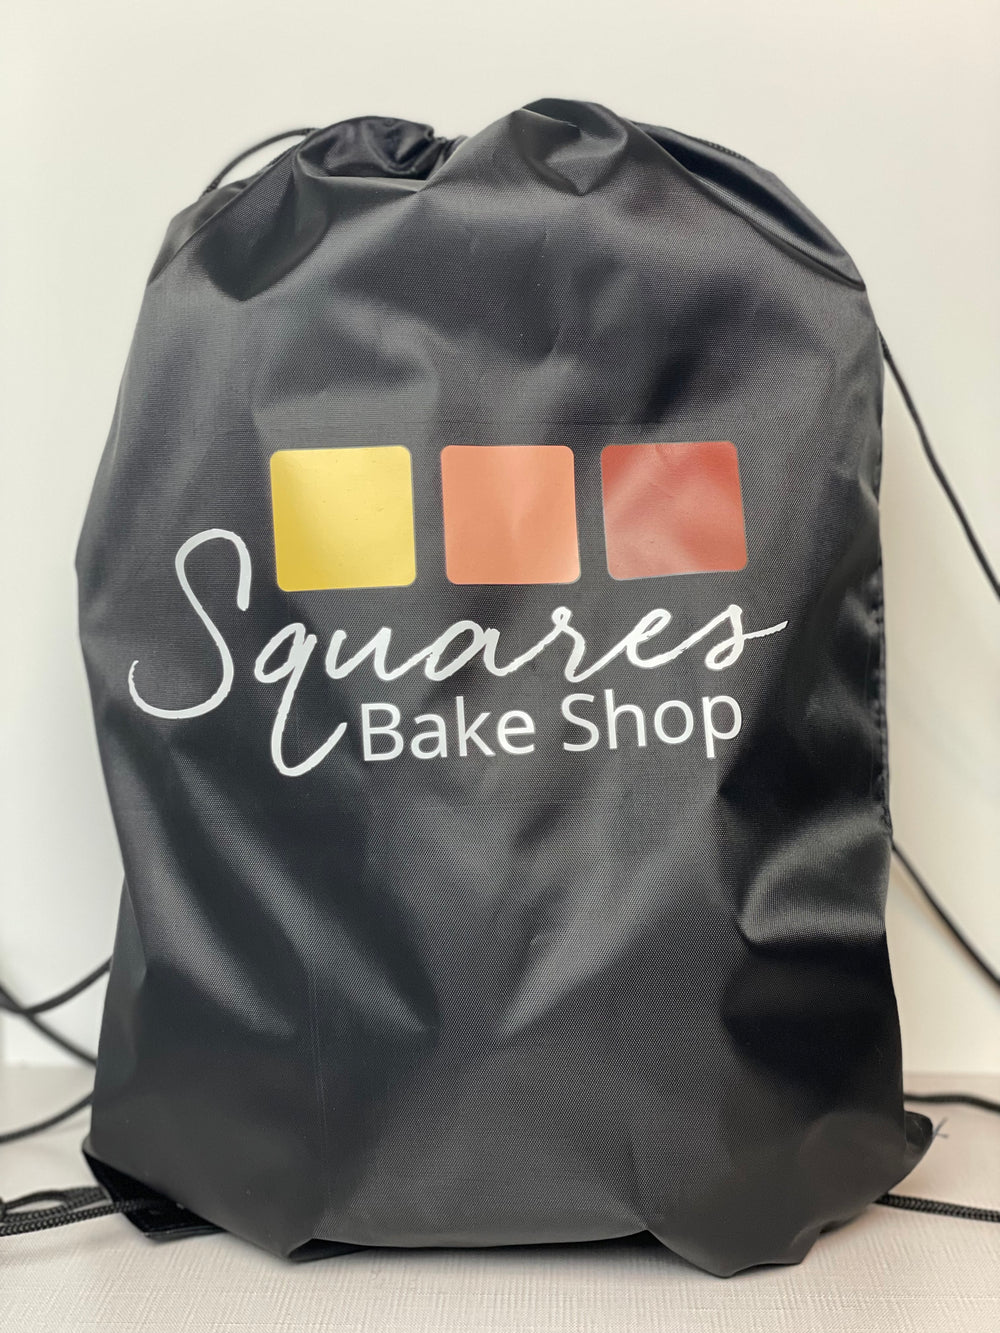 Squares Backpack